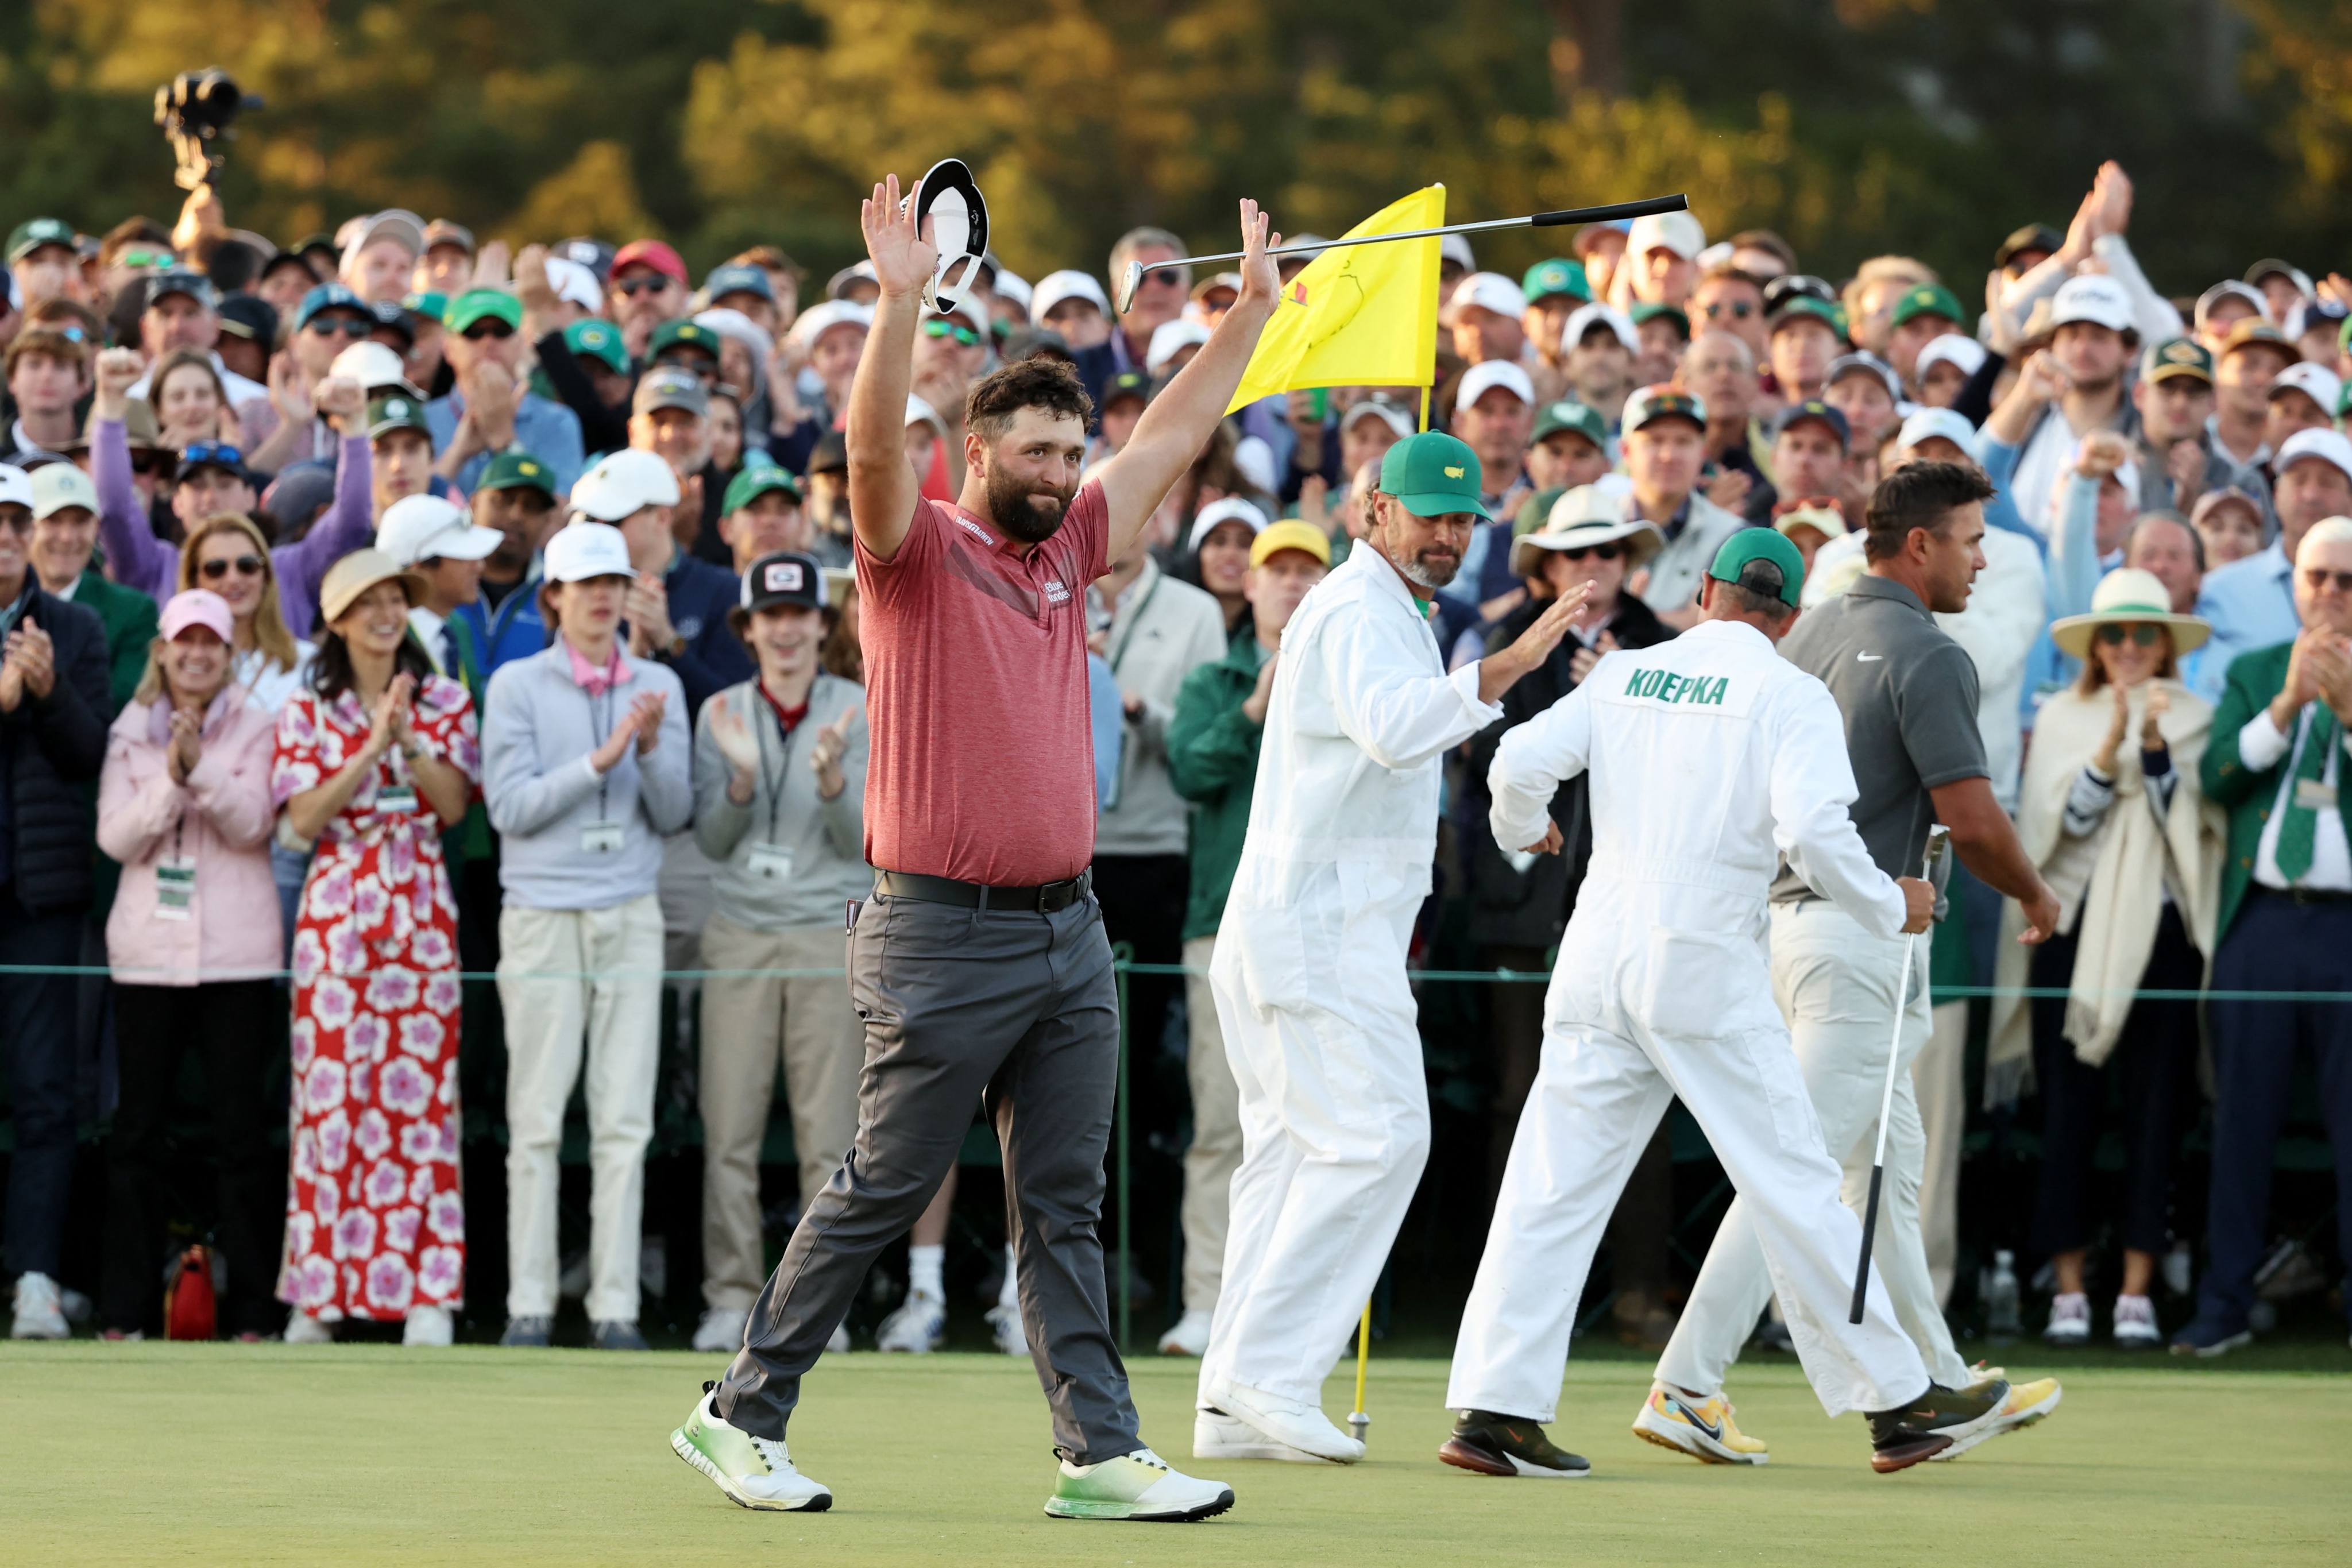 Jon Rahm of Spain celebrates on the 18th green after winning the Masters at Augusta National Golf Club. Photo: Getty Images via AFP